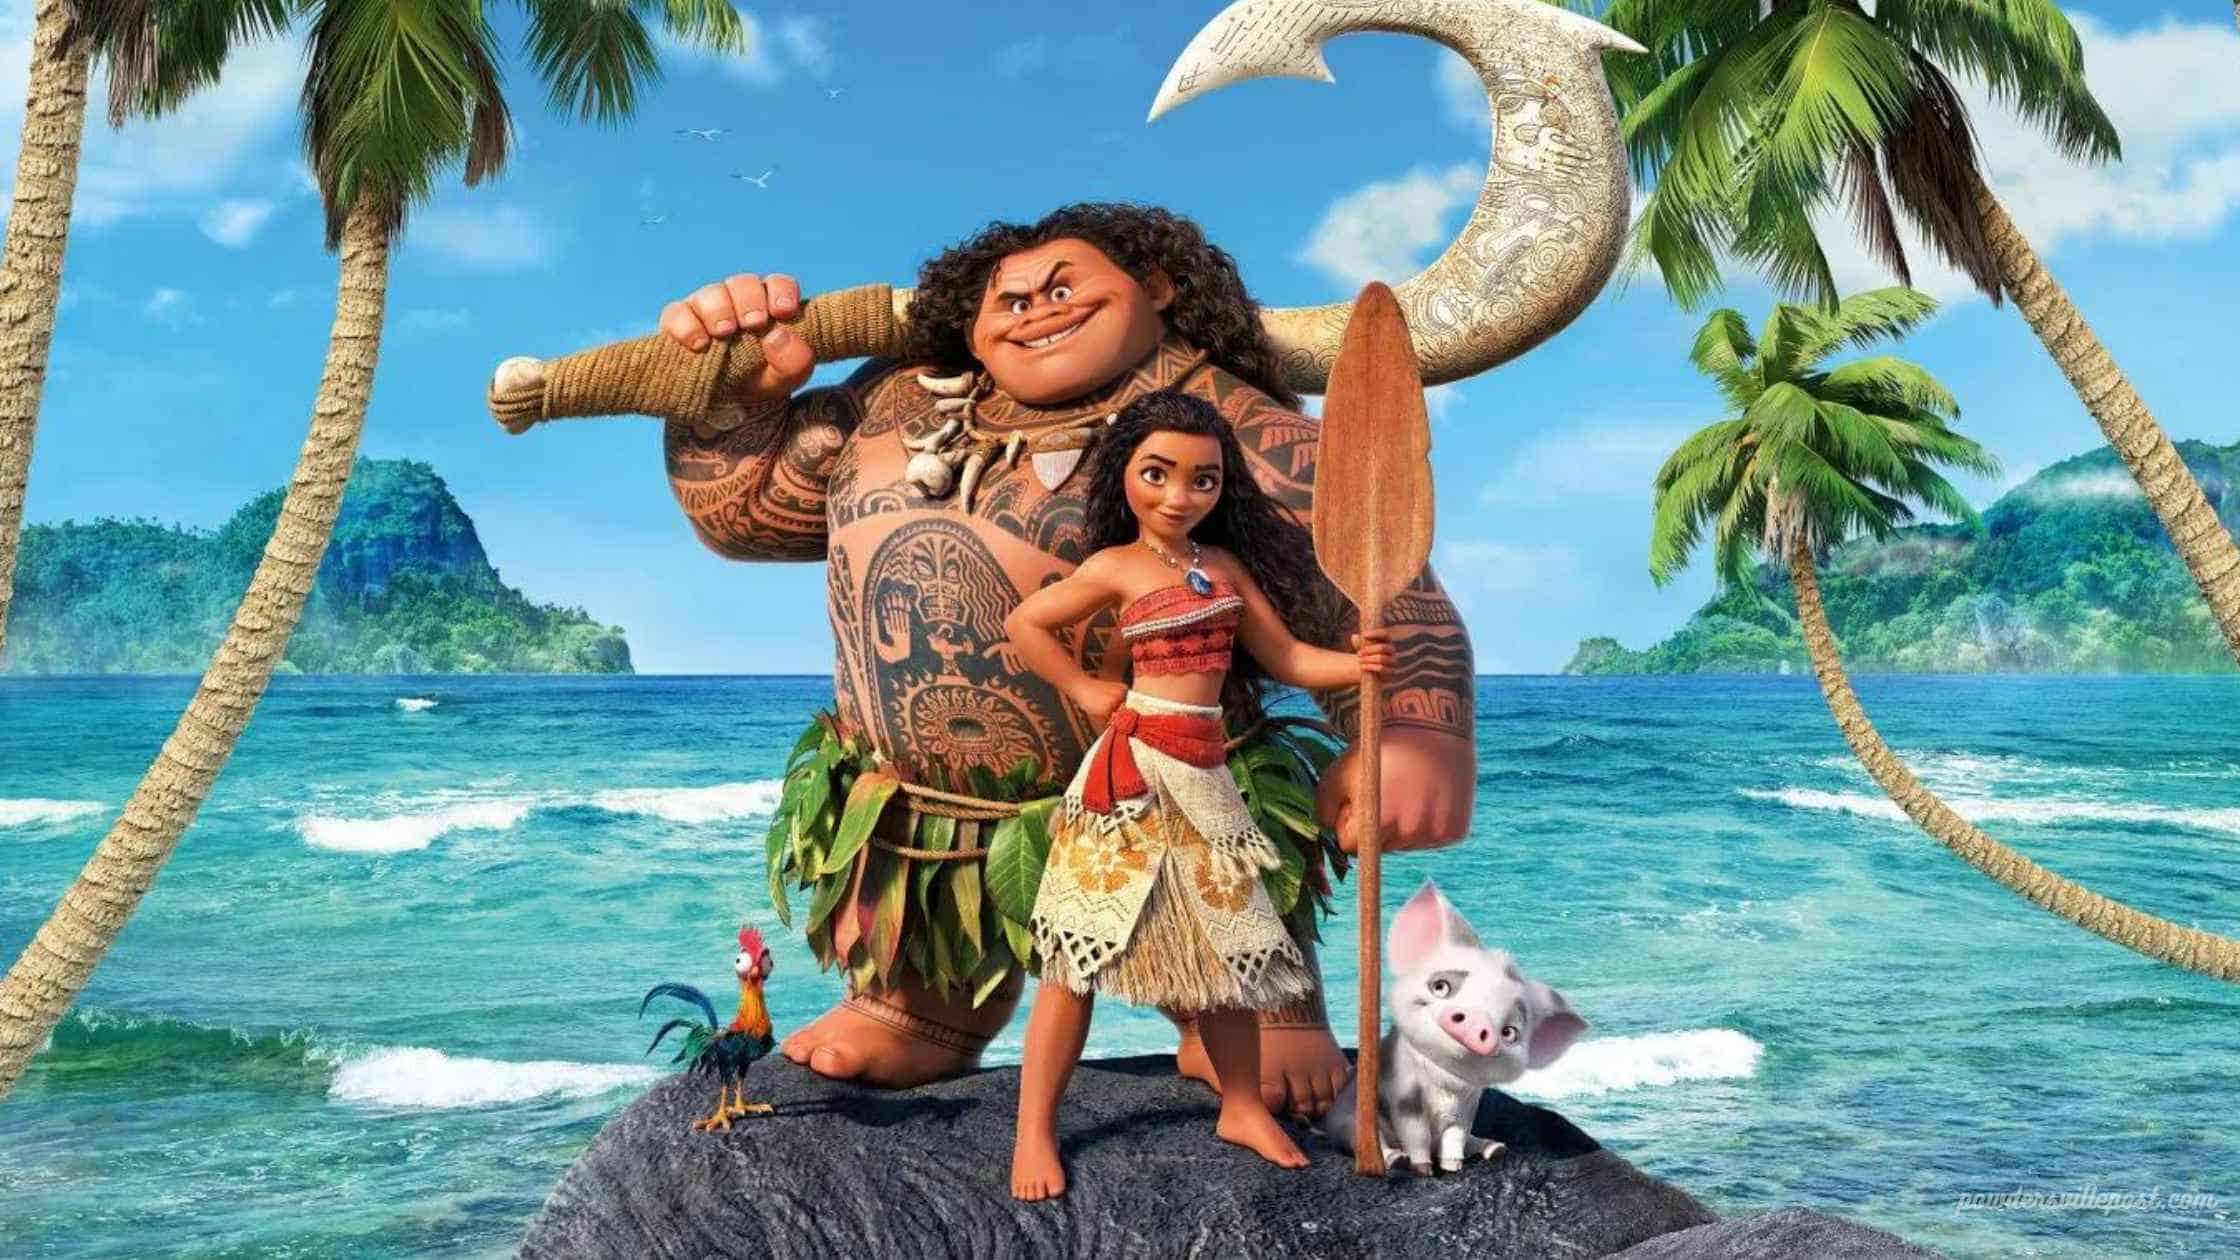 Amazing And Detailed Information Of Disney's Moana Film!!